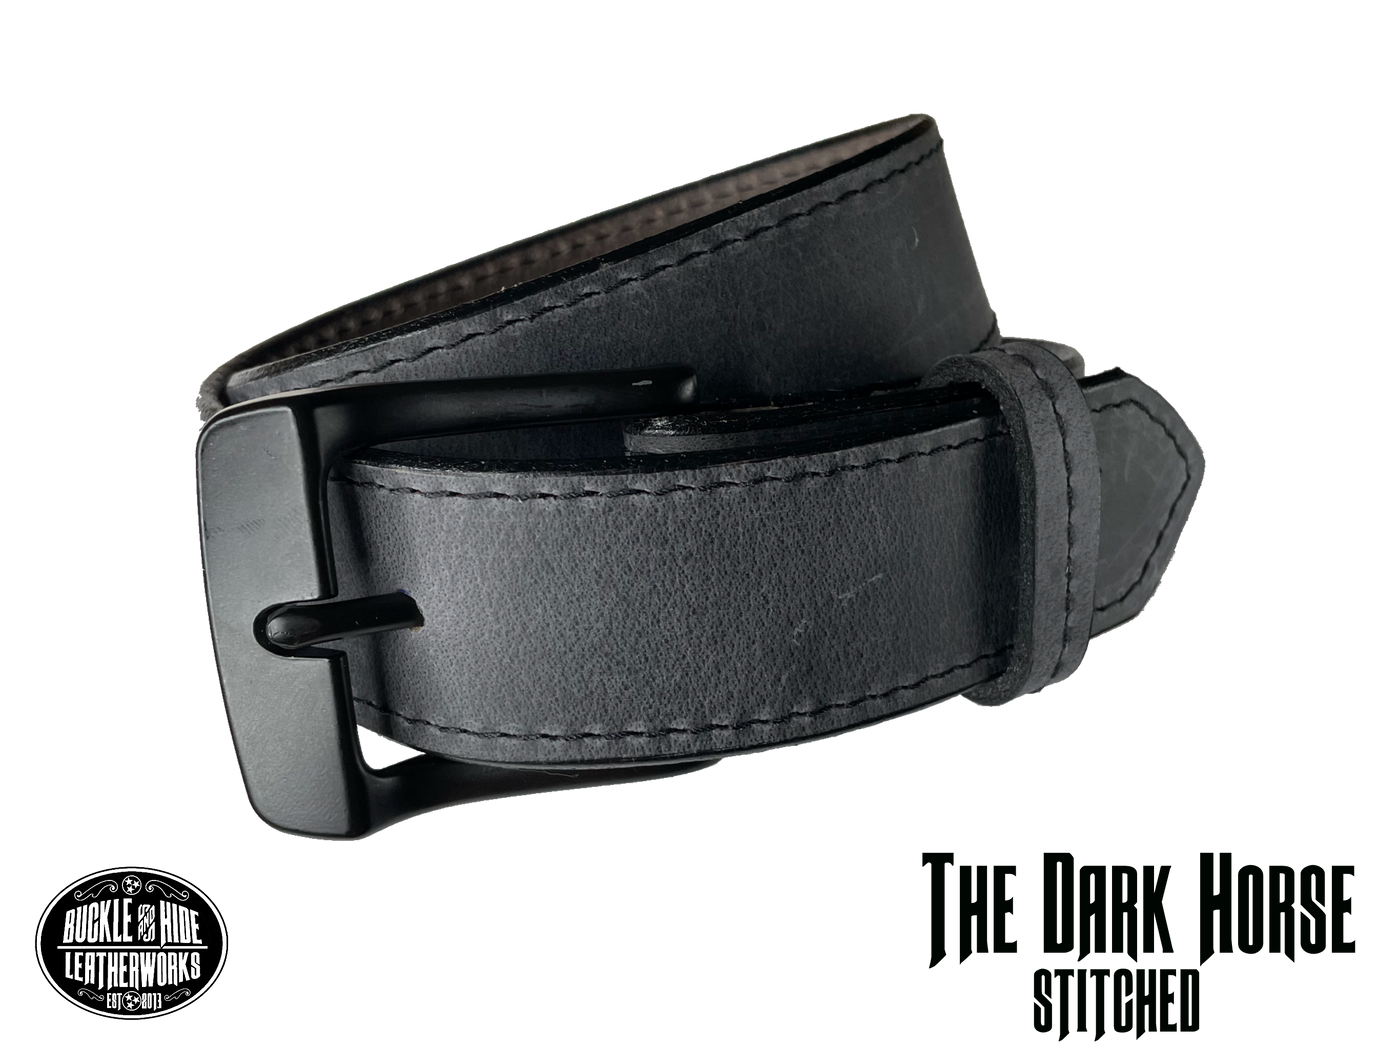 This gray leather belt is made from Crazy Horse tanned leather for that distressed and pull-up look. Choose with or without black stitching along the edges.  Has smooth black painted edges. It has a black Zinc buckle that is snapped in place. Belt is 1 1/2" wide and available in lengths from 34" to 44".  It is handmade in our shop in Smyrna, TN, just outside of Nashville.